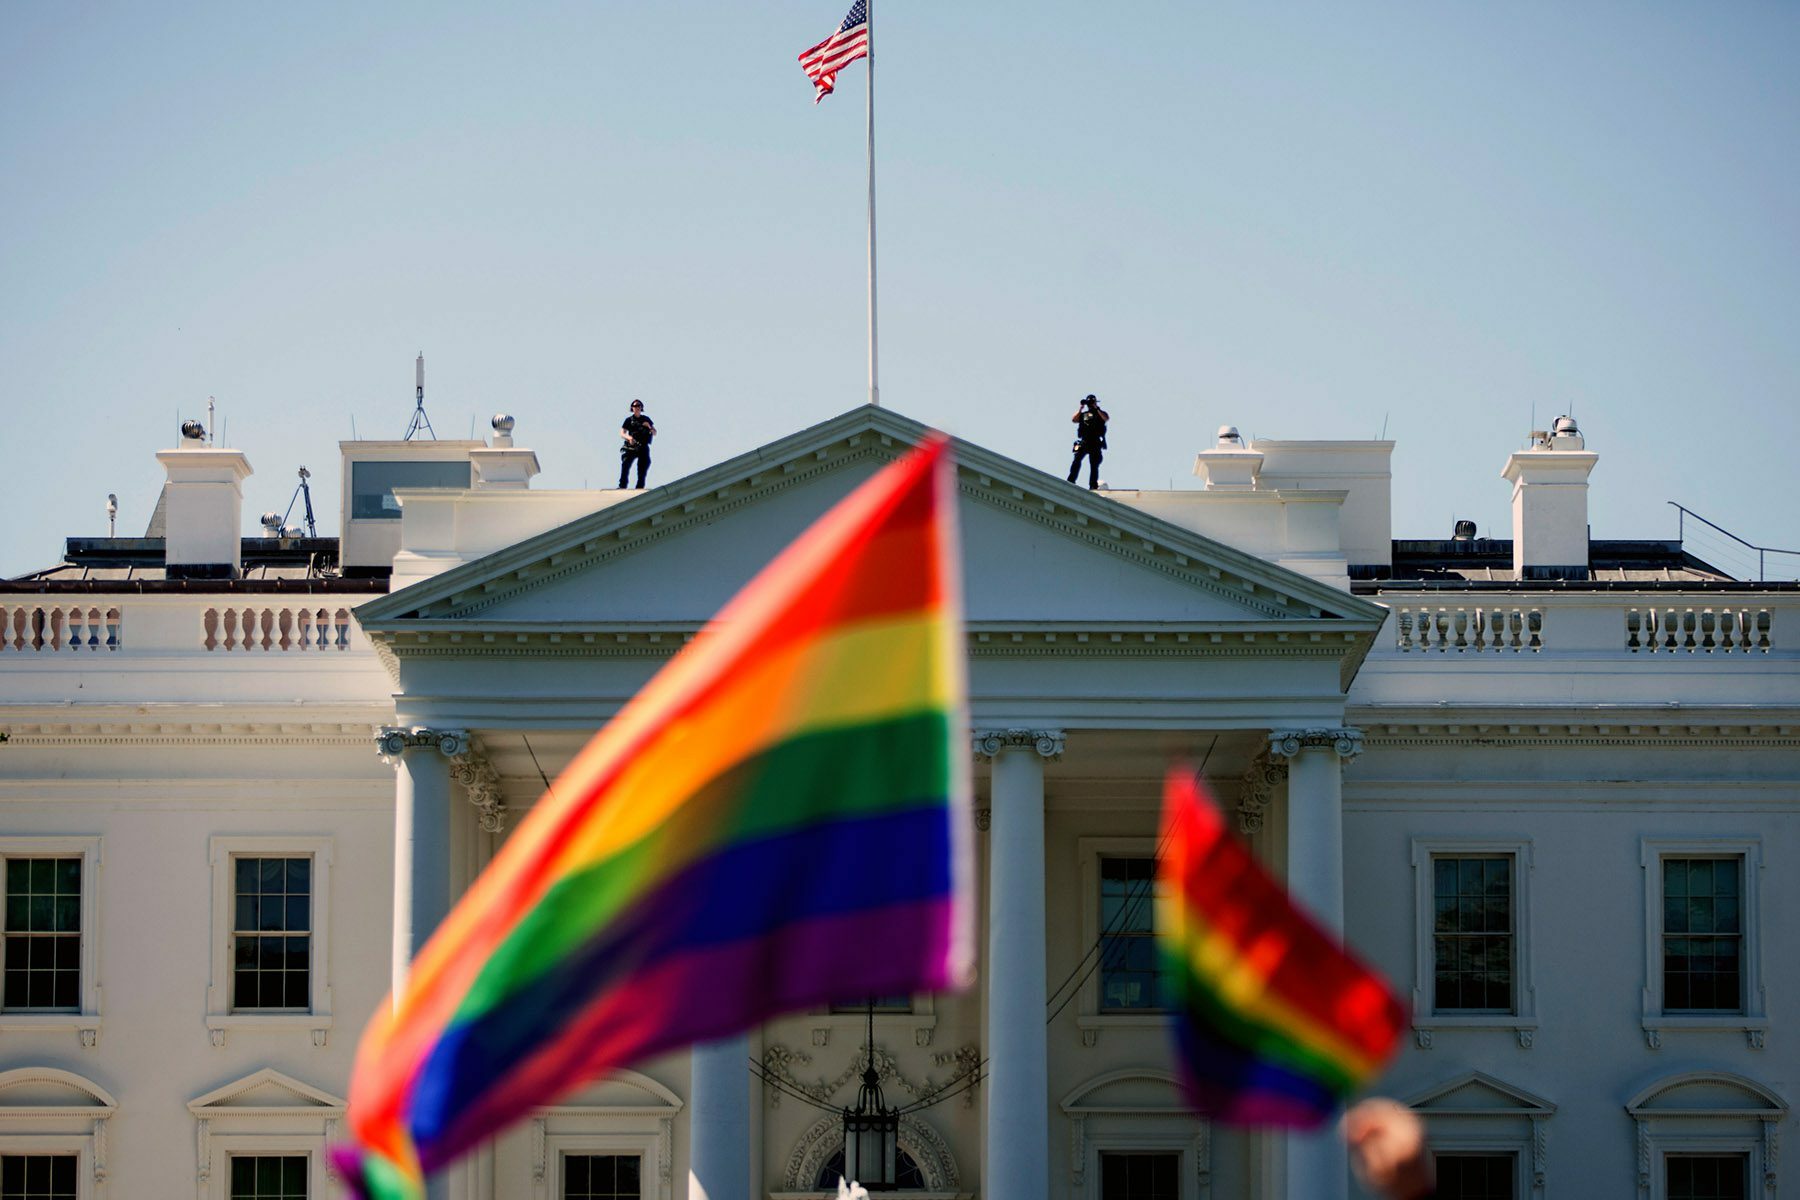 Pride flags are seen in front of the White House.